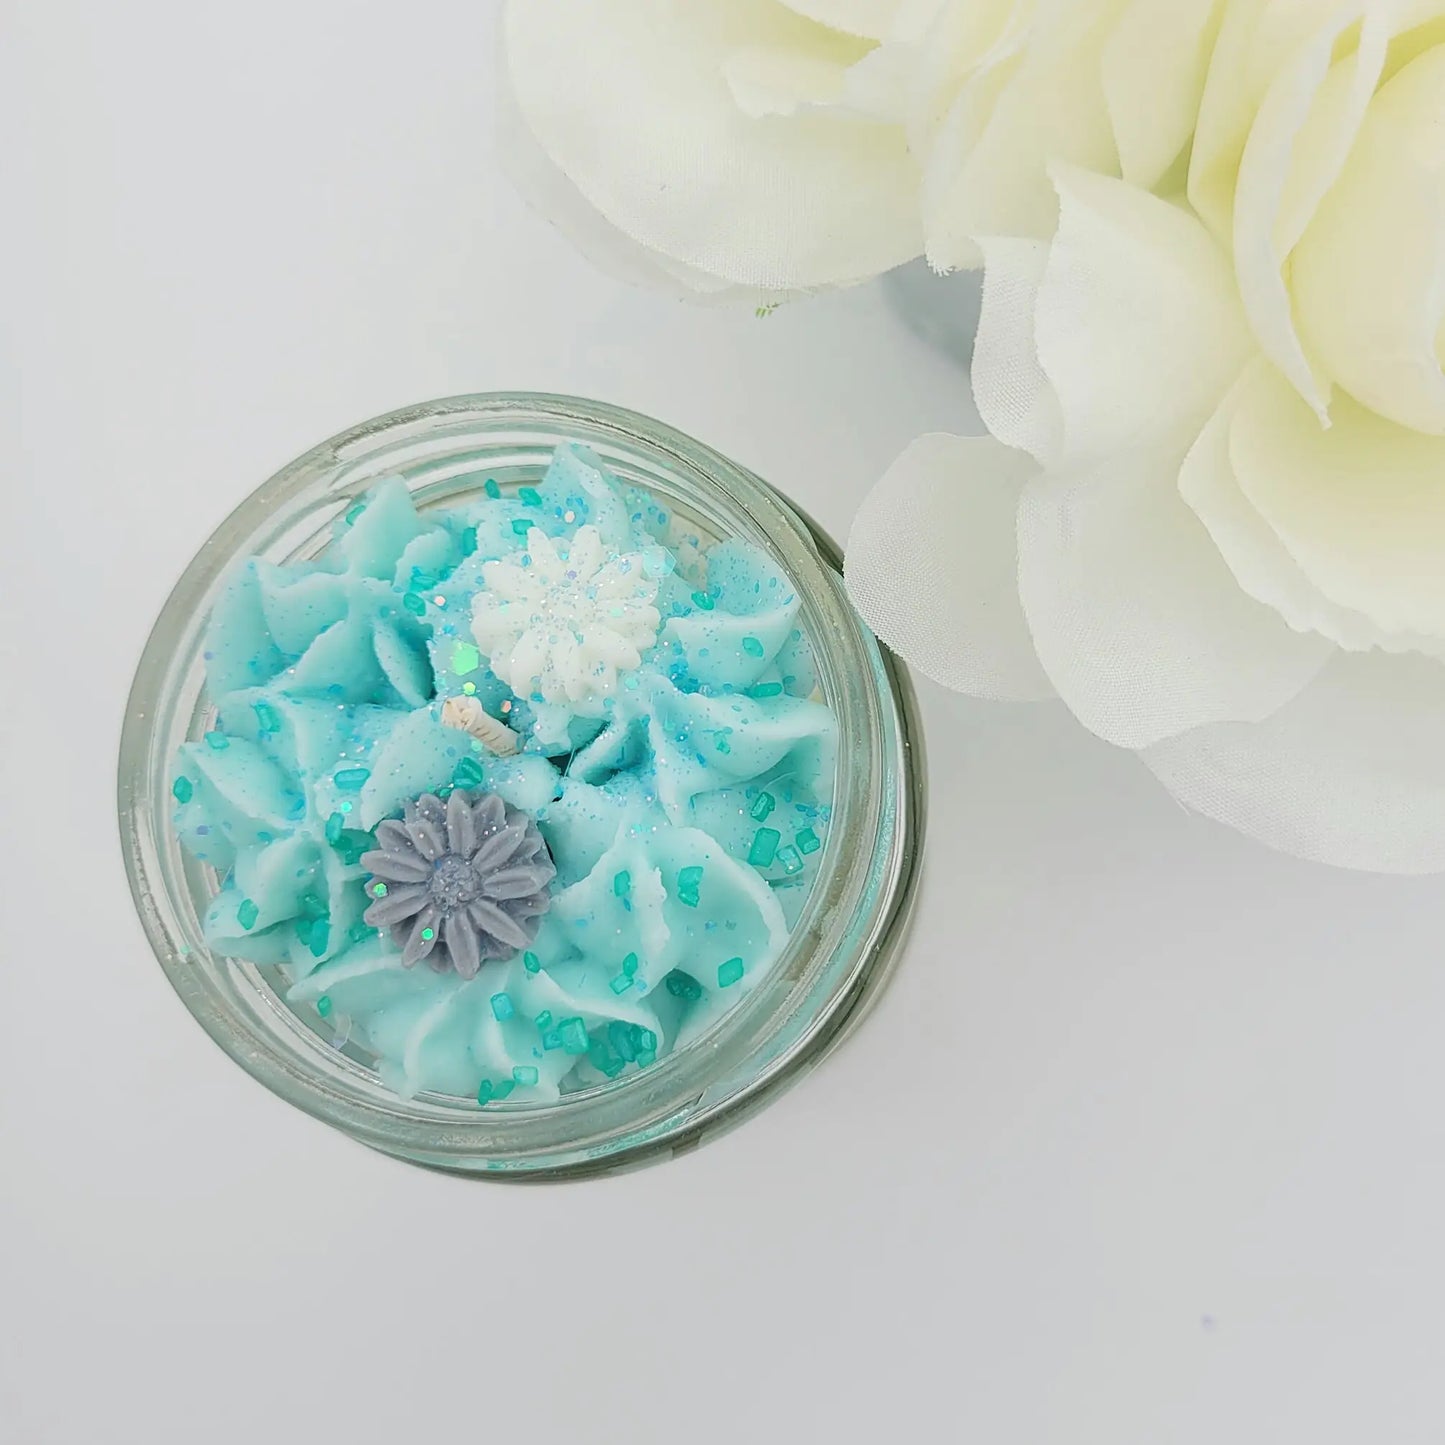 Flower Candle - L'adore scent. - Spellbound